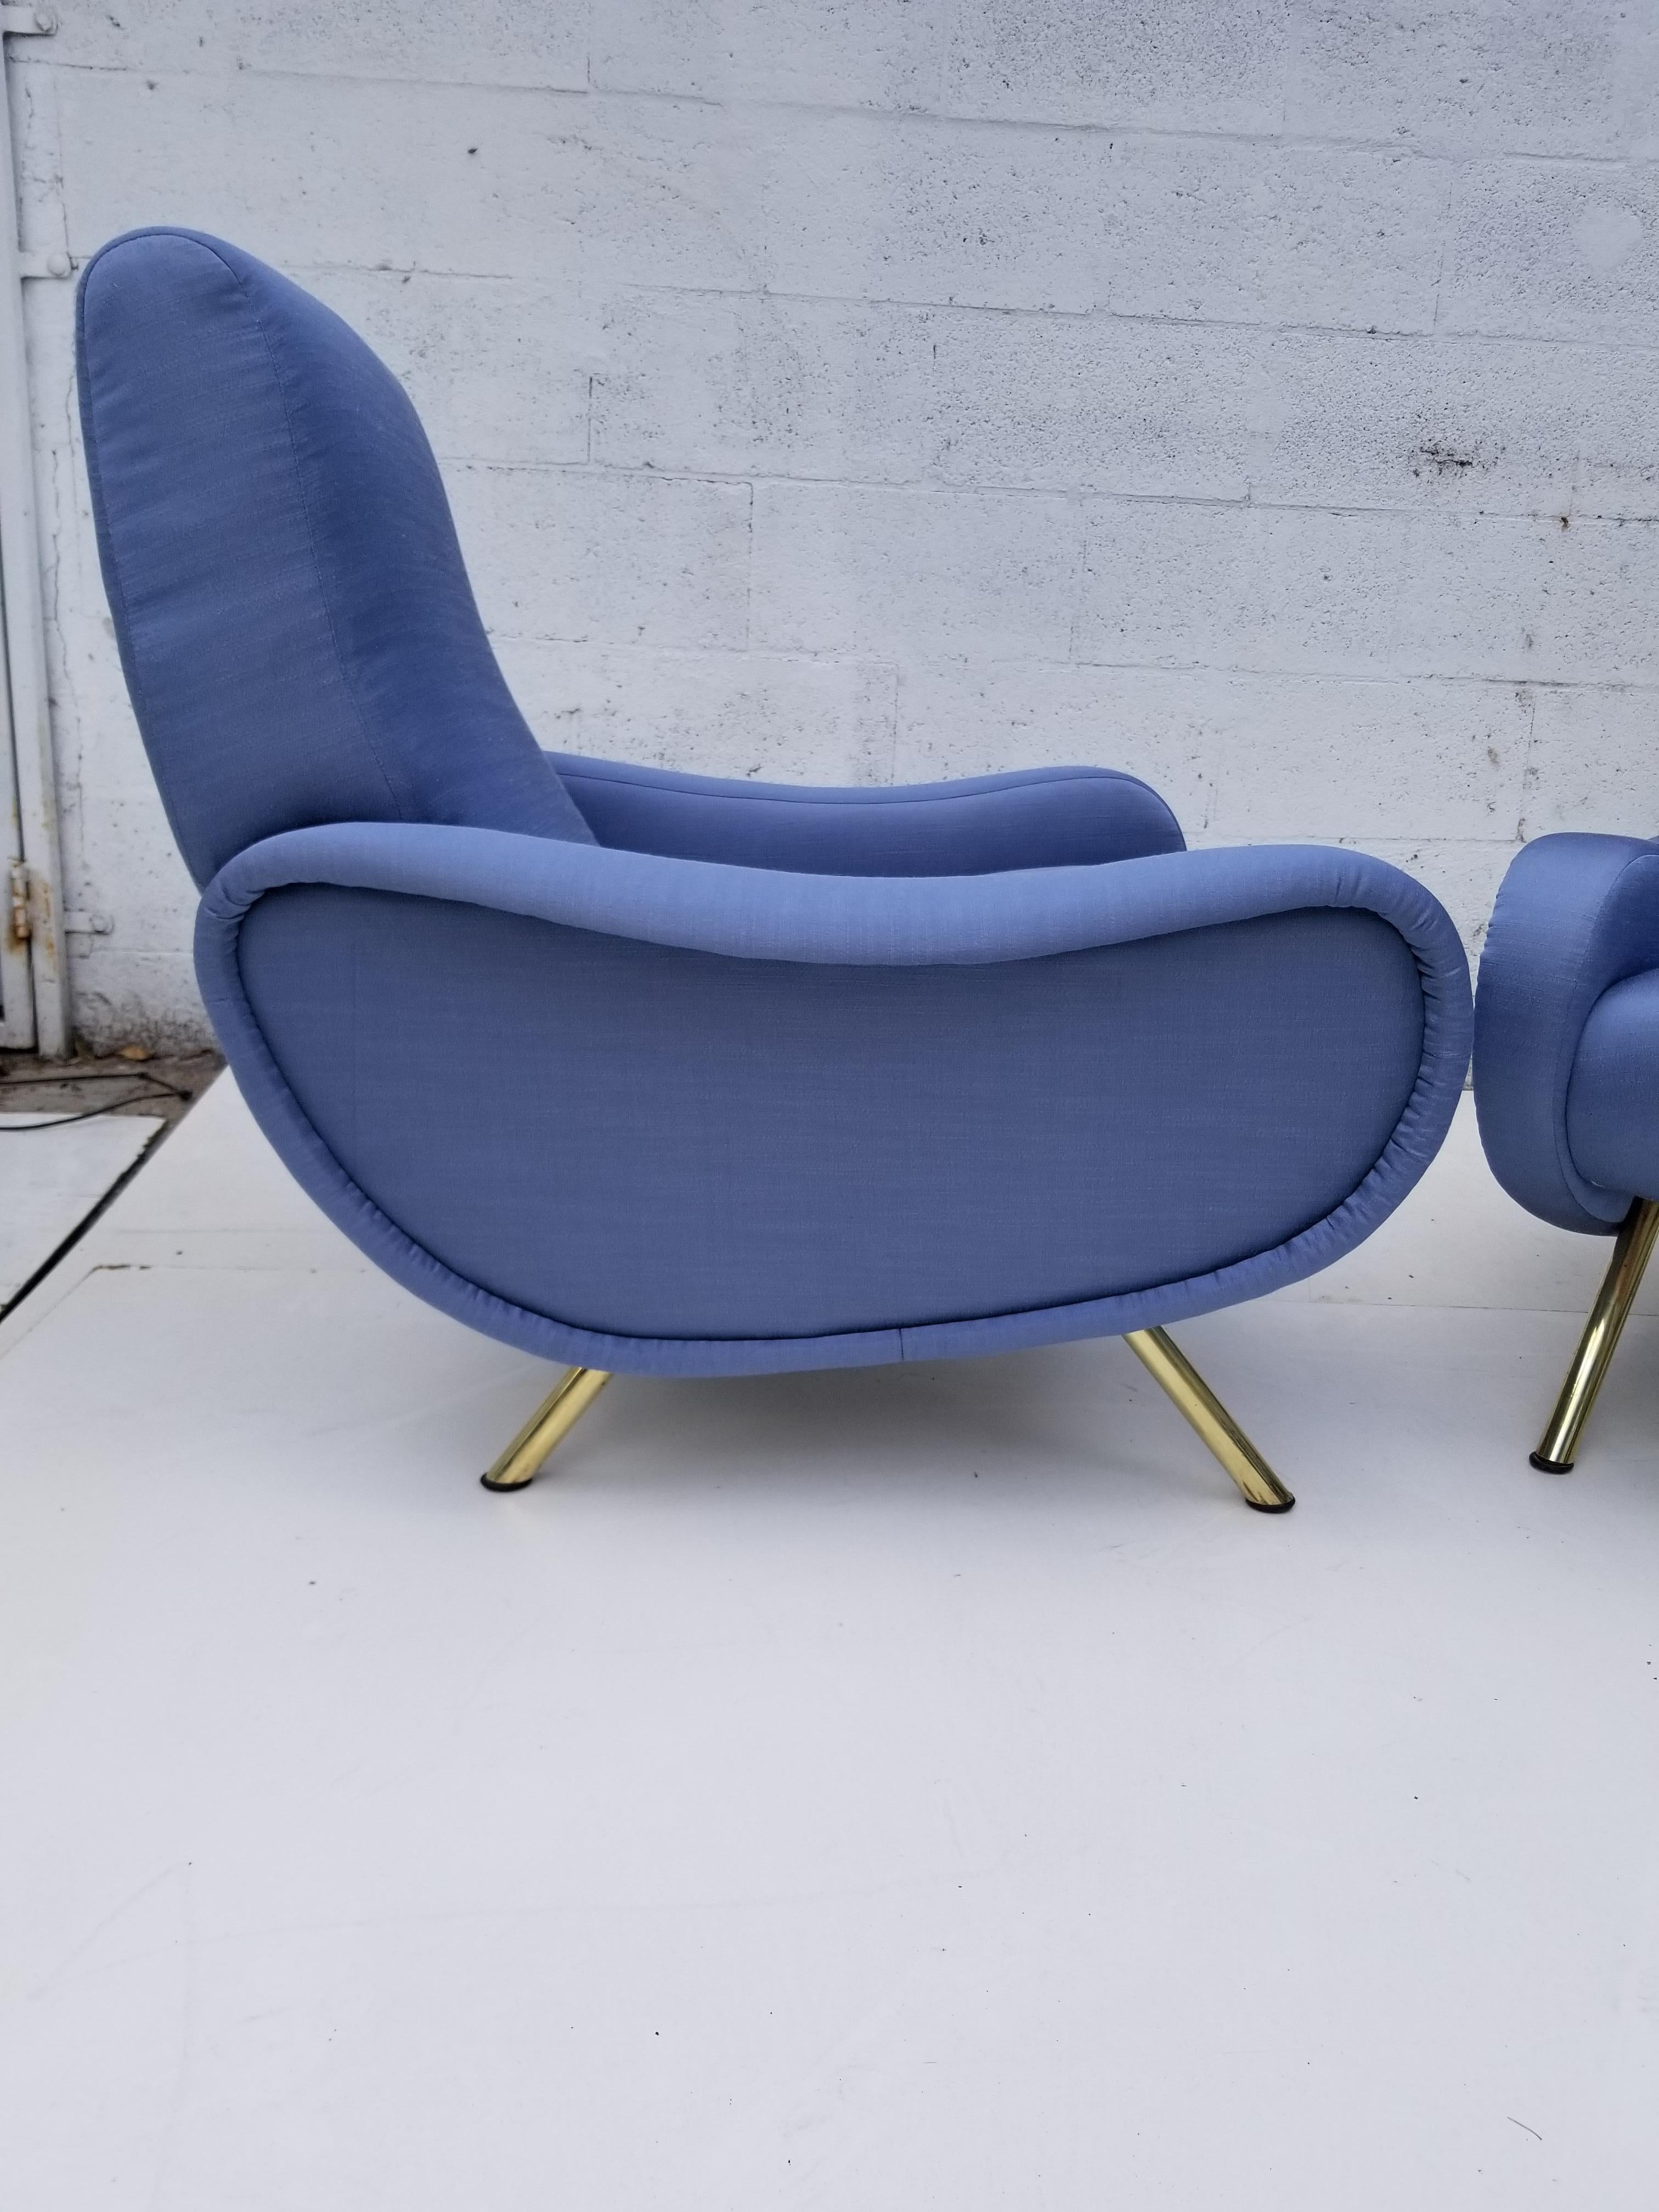 Pair of early edition circa 1950 lady chairs by Marco Zanuso, Italy.
Arflex editeur
Totally restored, new foam, new fabric, original wood chassis.
Bought from a St tropez Estate, 1st owner.
   